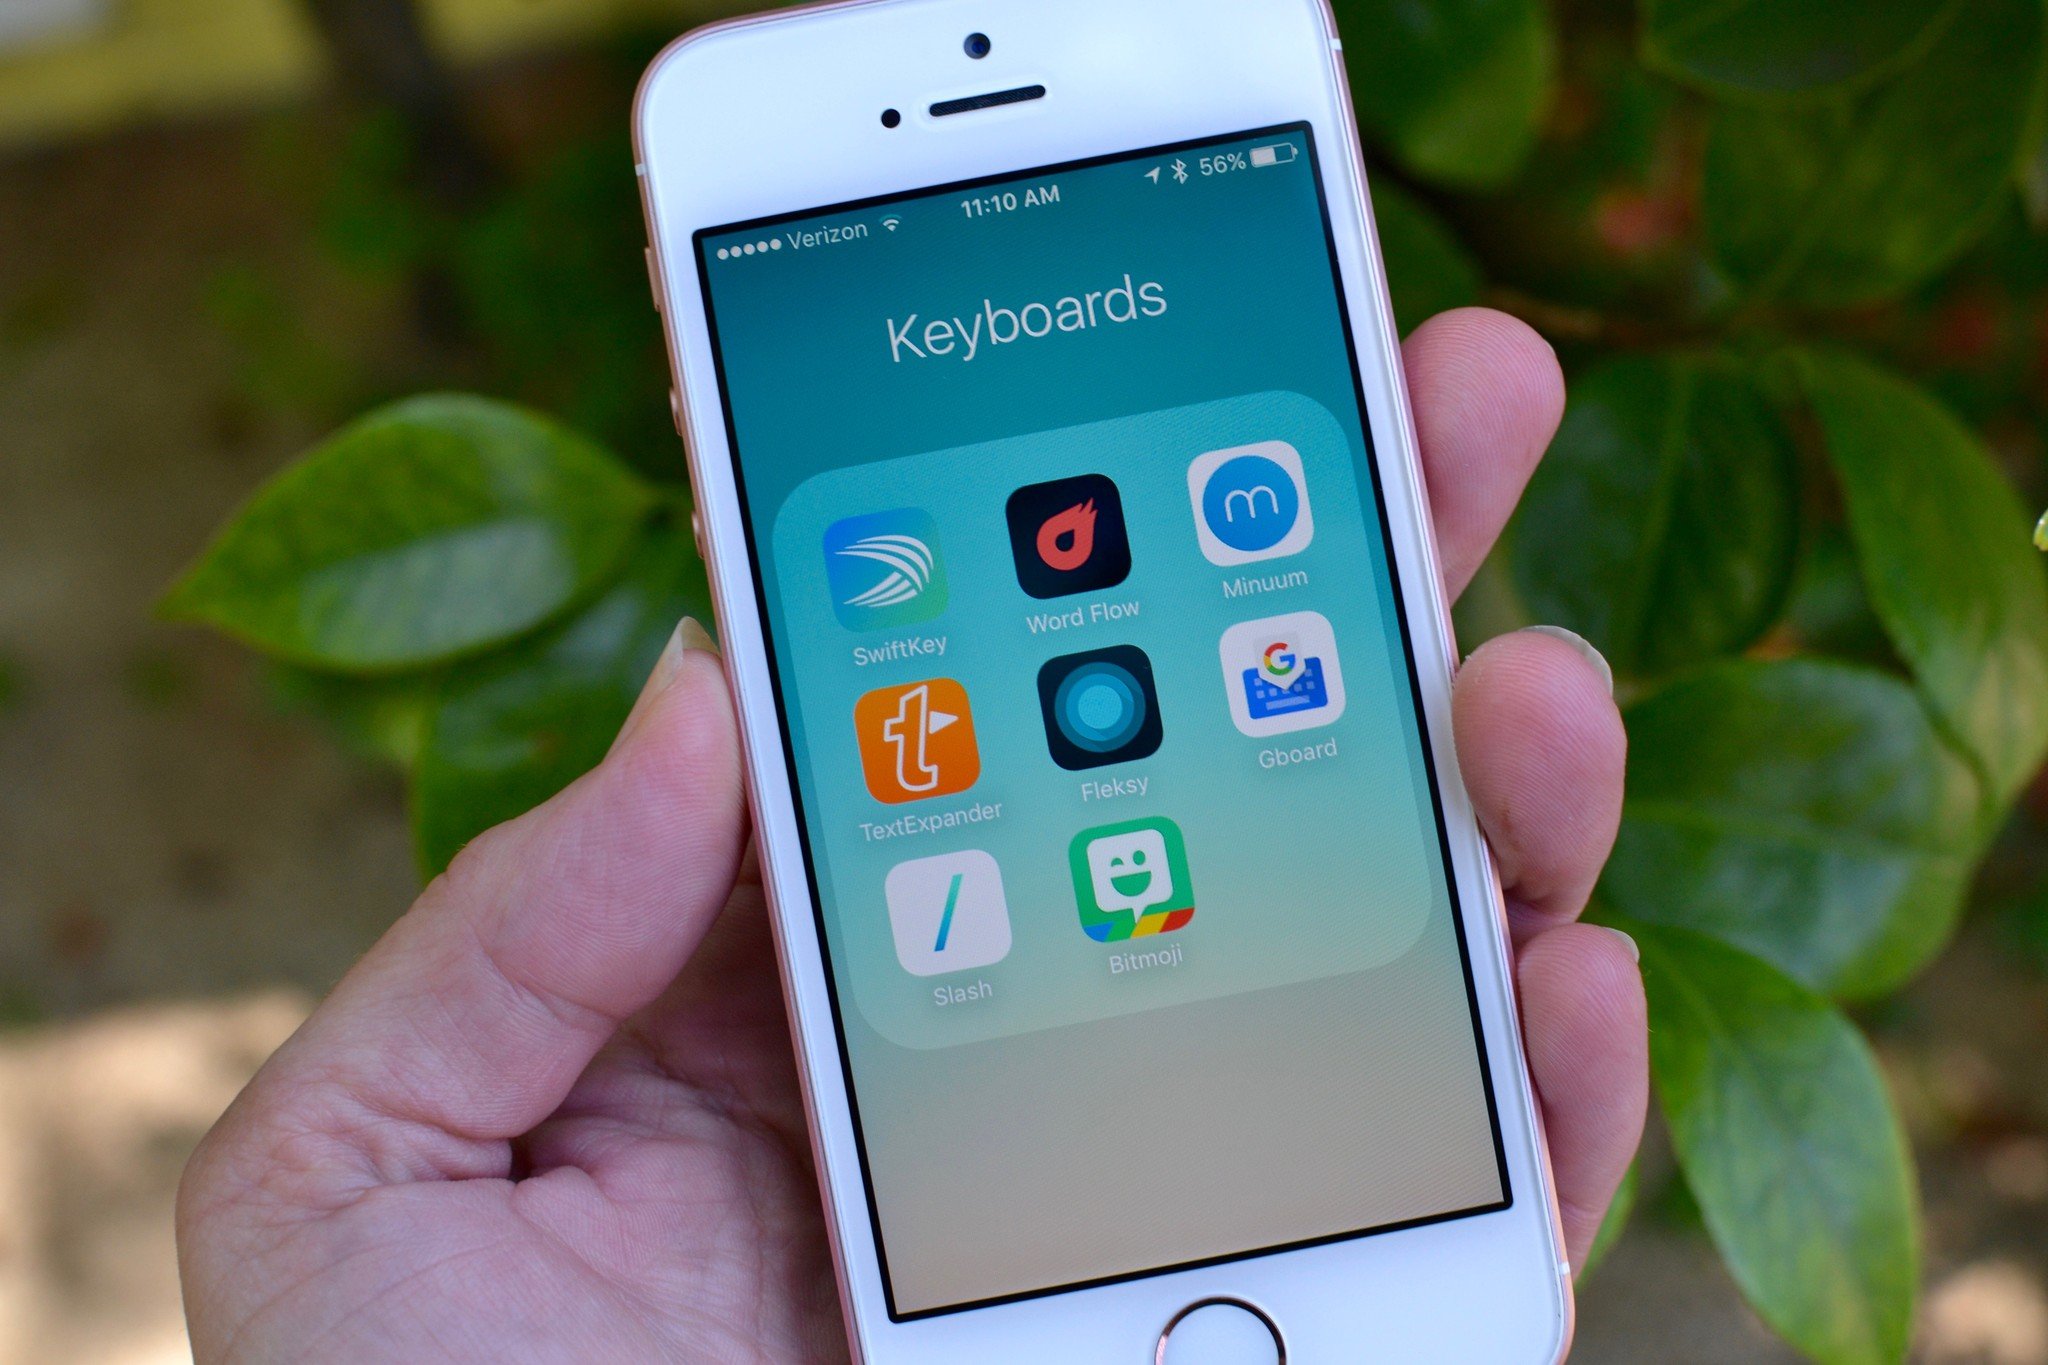 Third-party keyboards on the iPhone